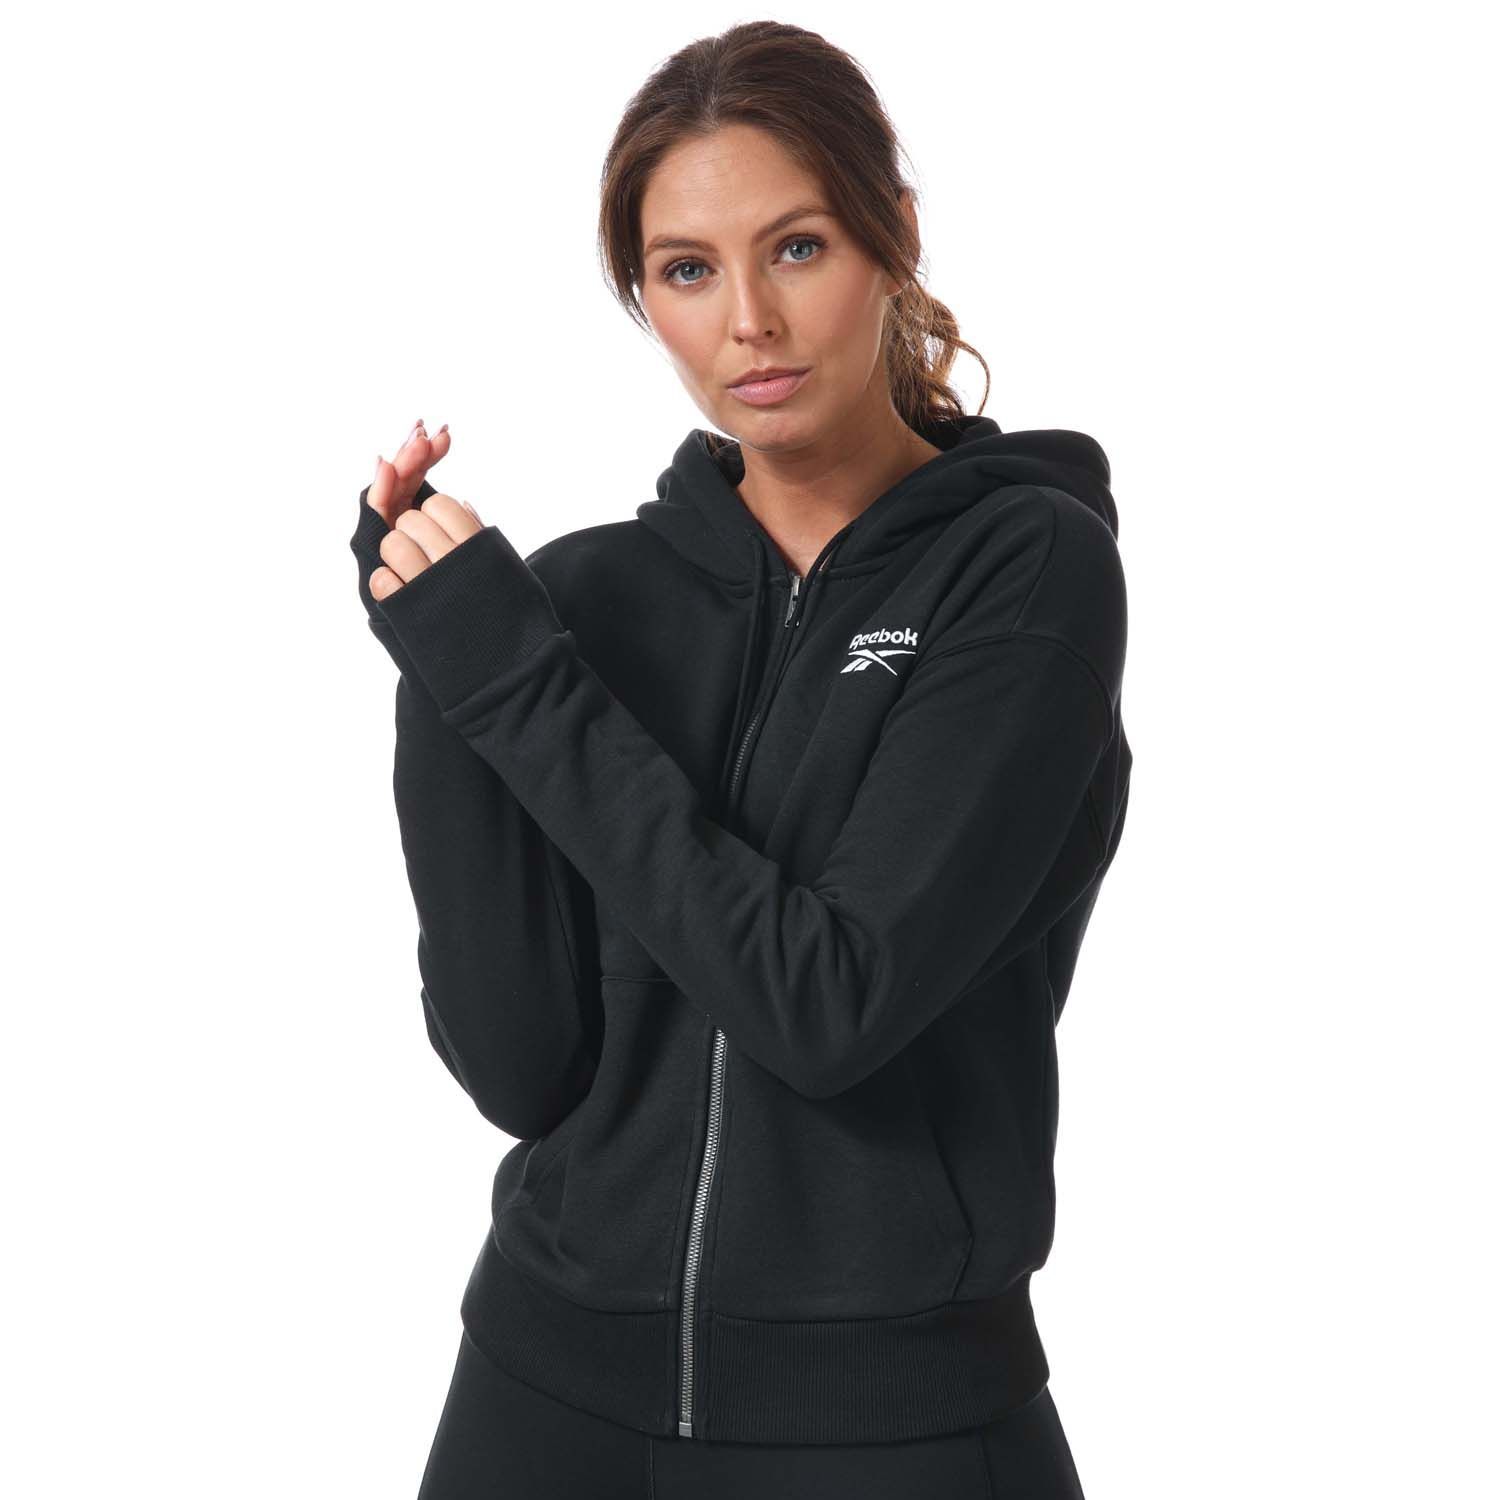 Womens Reebok Identity Zip- Up Track Top in black.- Drawcord-adjustable hood.- Long sleeves with ribbed cuffs.- Full zip fastening.- Kangaroo pocket.- Ribbed hem.- Small logo.- Oversize fit.- Main Material: 80% Cotton  20% Polyester (Recycled). Rib Part: 95% Cotton  5% Elastane. - Ref:GL2561